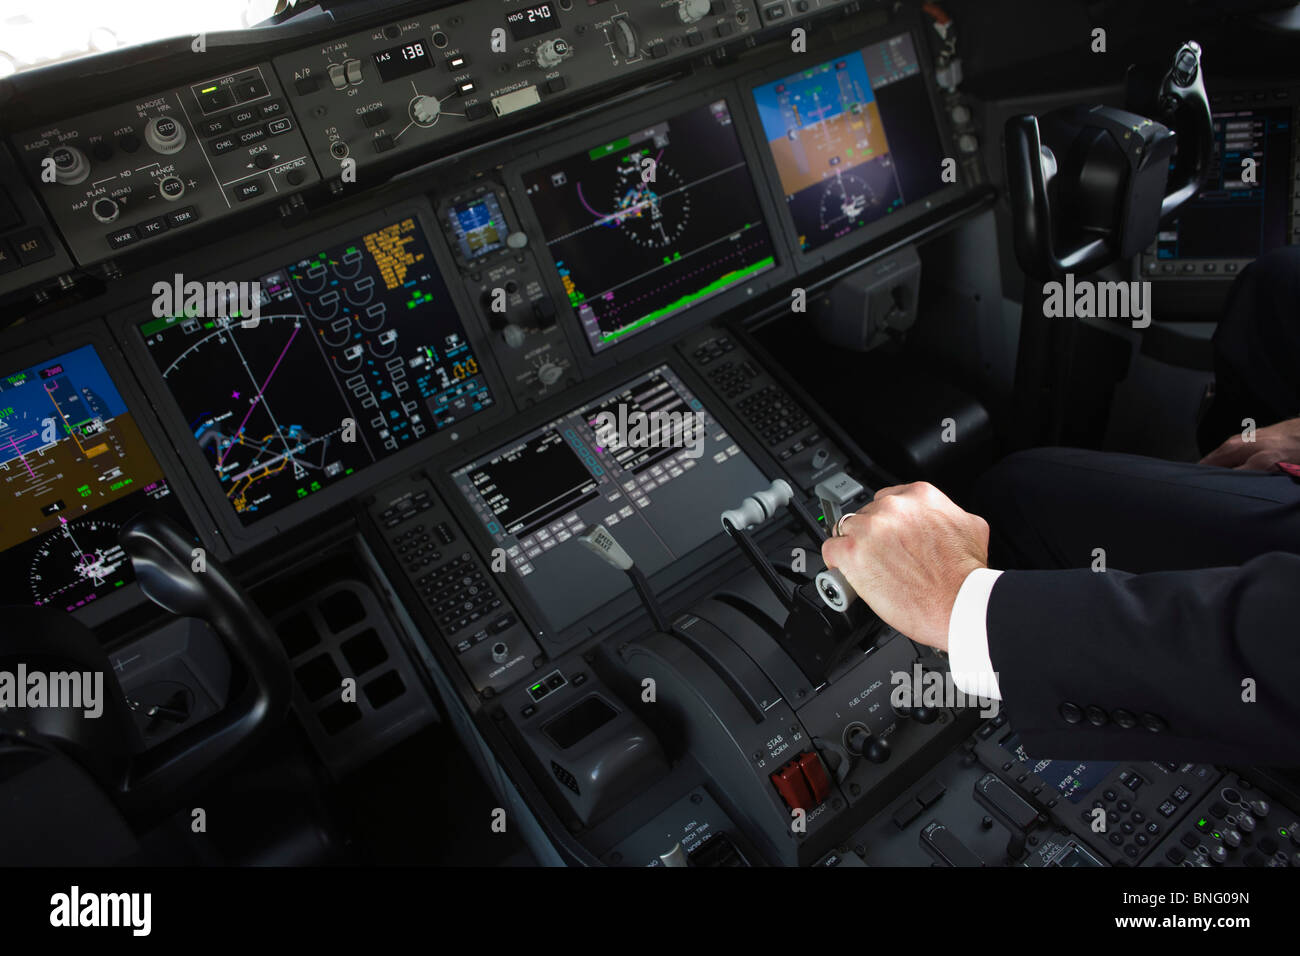 Boeing pilot sits in glass cockpit of the 787 Dreamliner (N787BX) at the Farnborough Airshow. Stock Photo